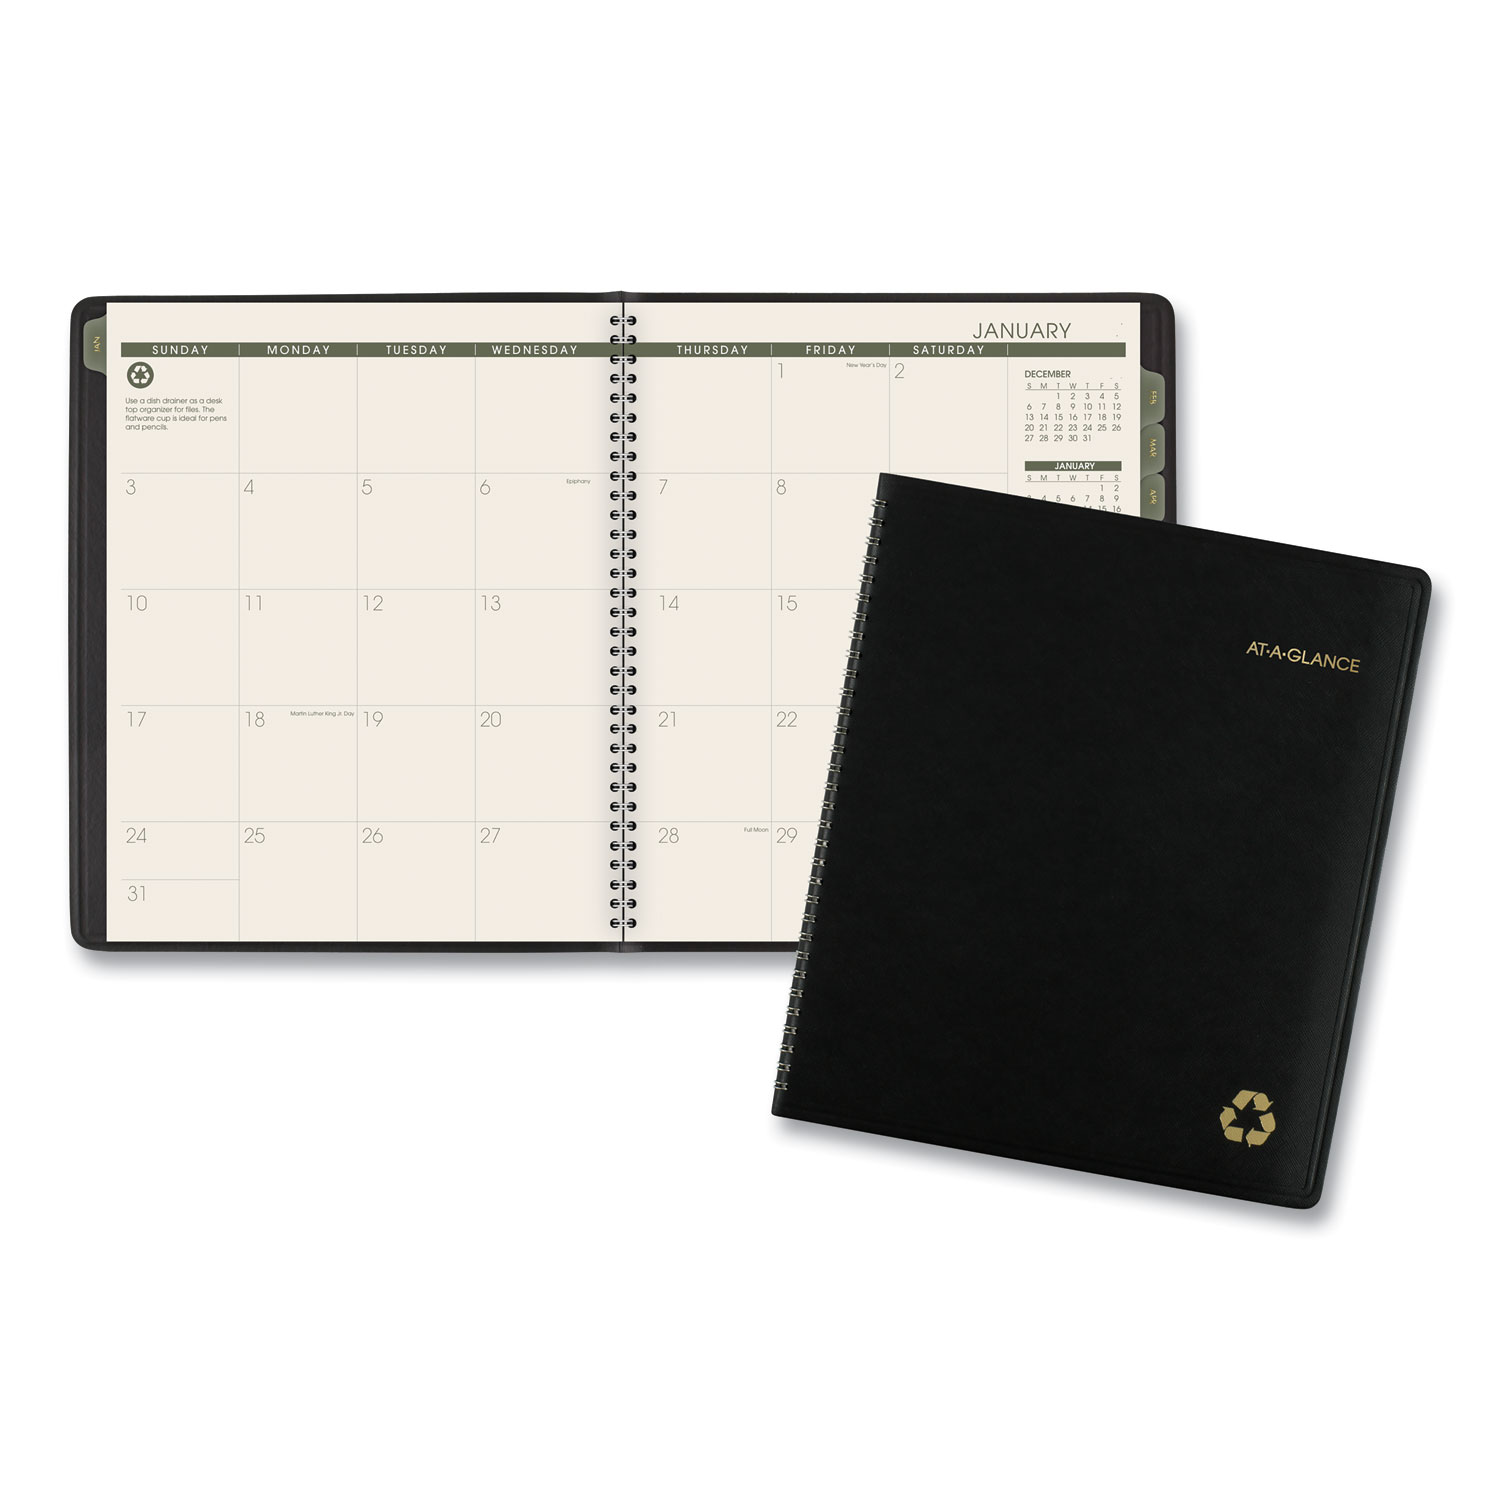  AT-A-GLANCE 70260G05 Recycled Monthly Planner, 11 x 8.88, Black, 2020 (AAG70260G05) 